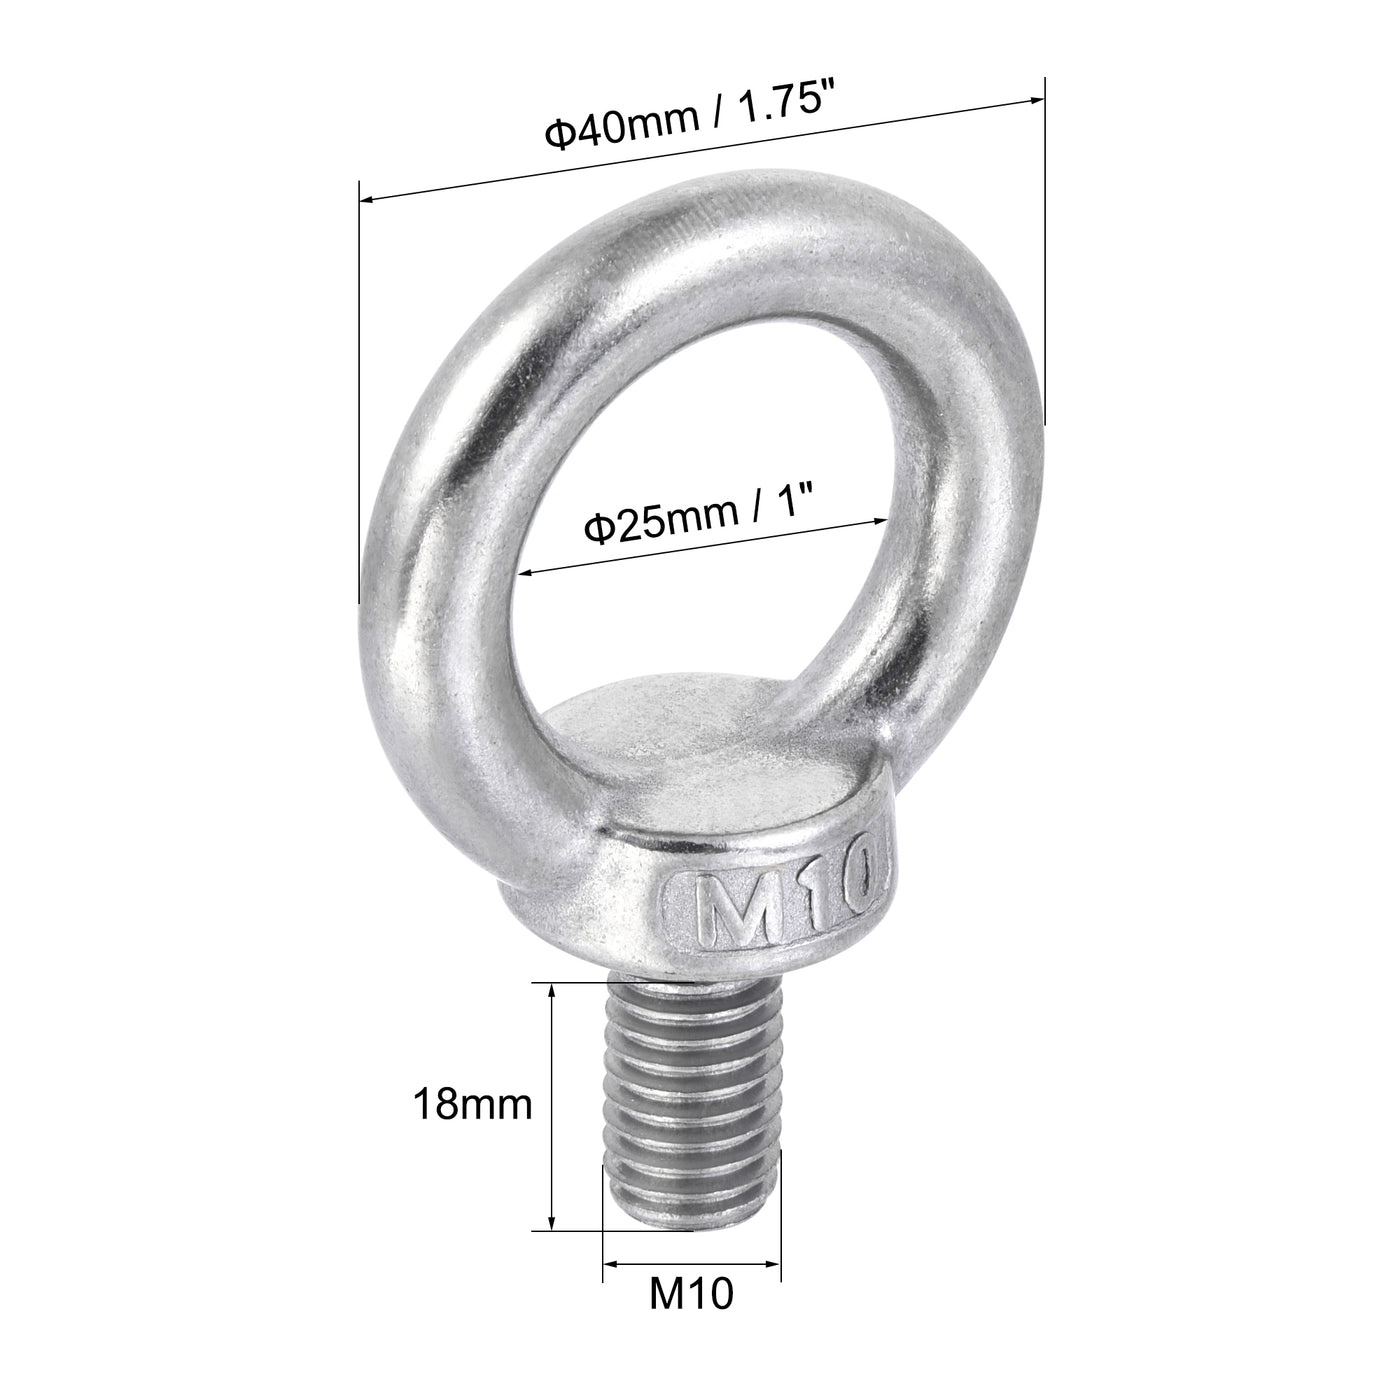 uxcell Uxcell Lifting Eye Bolt M10 x 18mm Male Thread with Hex Screw Nut Gasket Flat Washer for Hanging, 304 Stainless Steel, 4 Sets